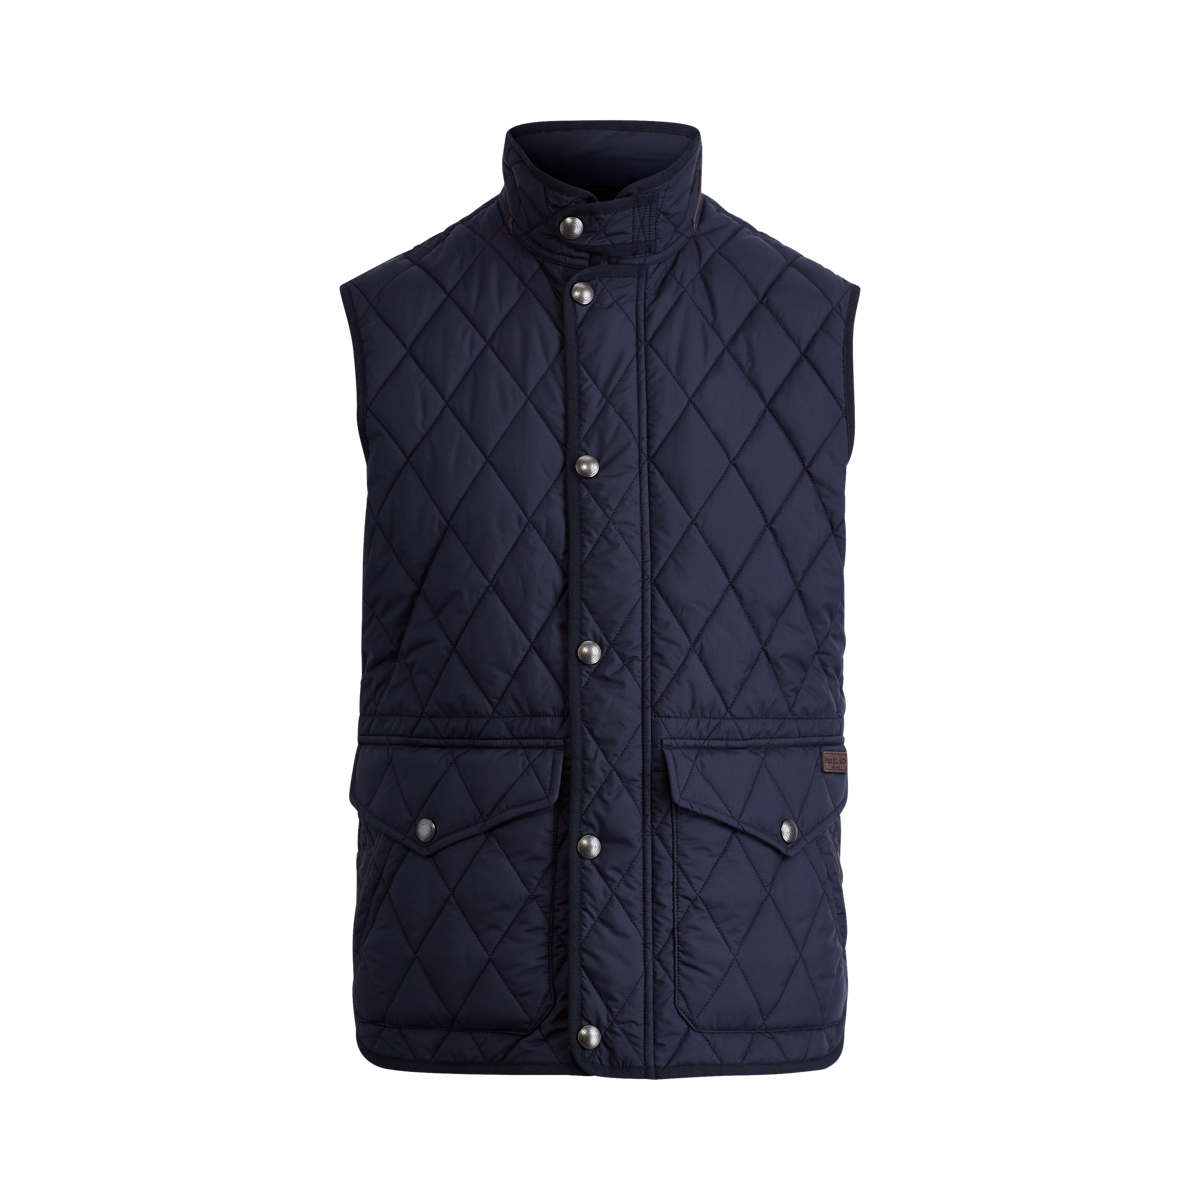 The Iconic Quilted Vest